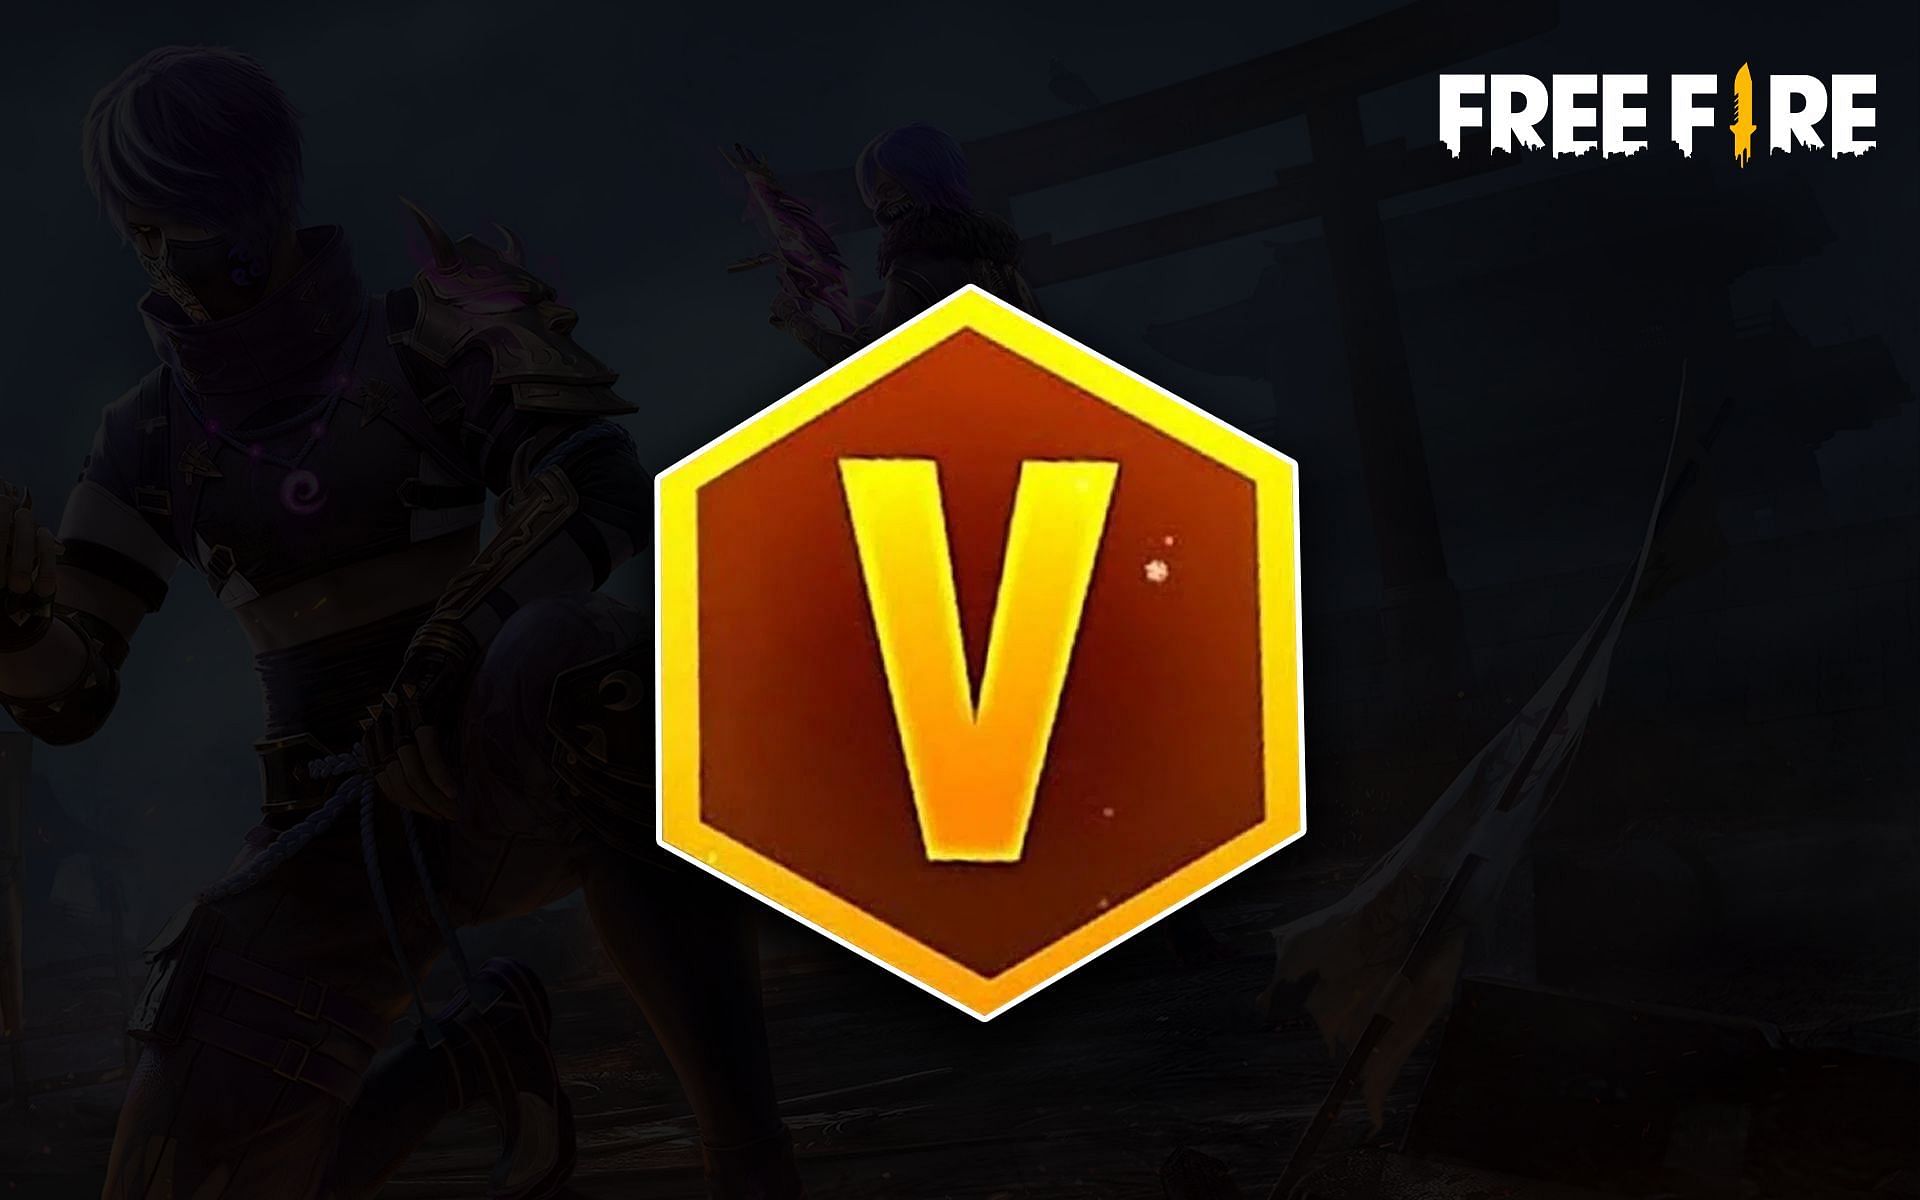 The V Badge is popular in the game&rsquo;s community, and many players wish to acquire it (Image via Sportskeeda)